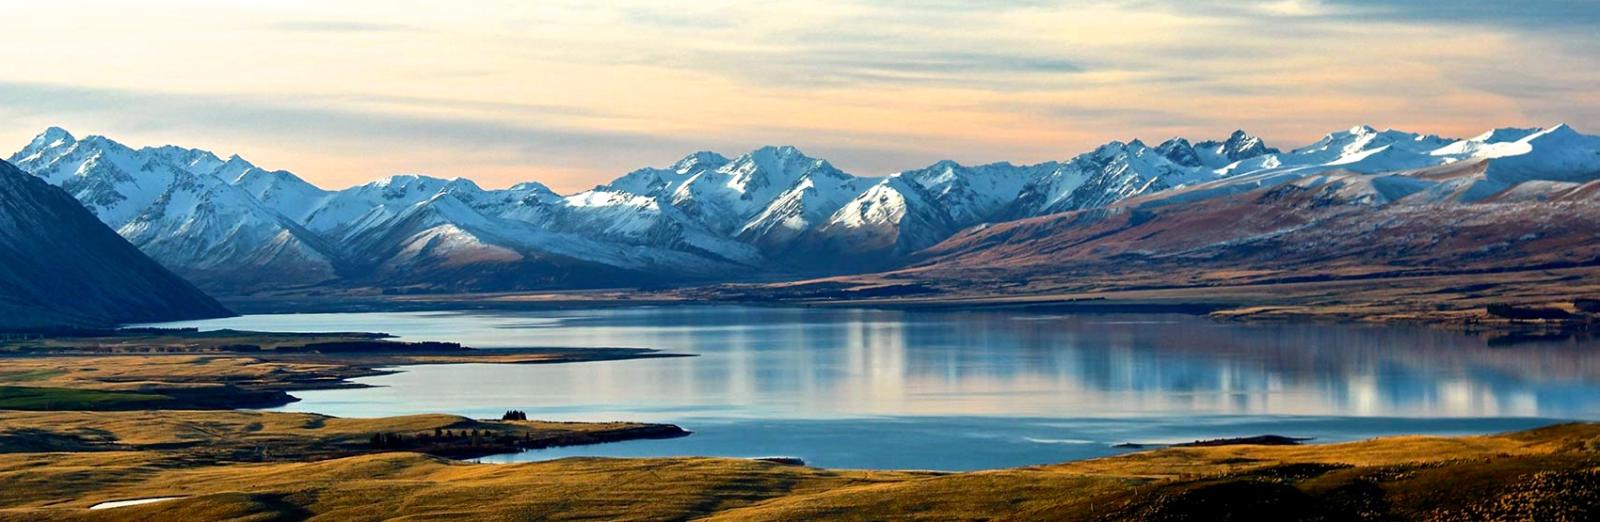 14 Day South Island Family Explorer Itinerary